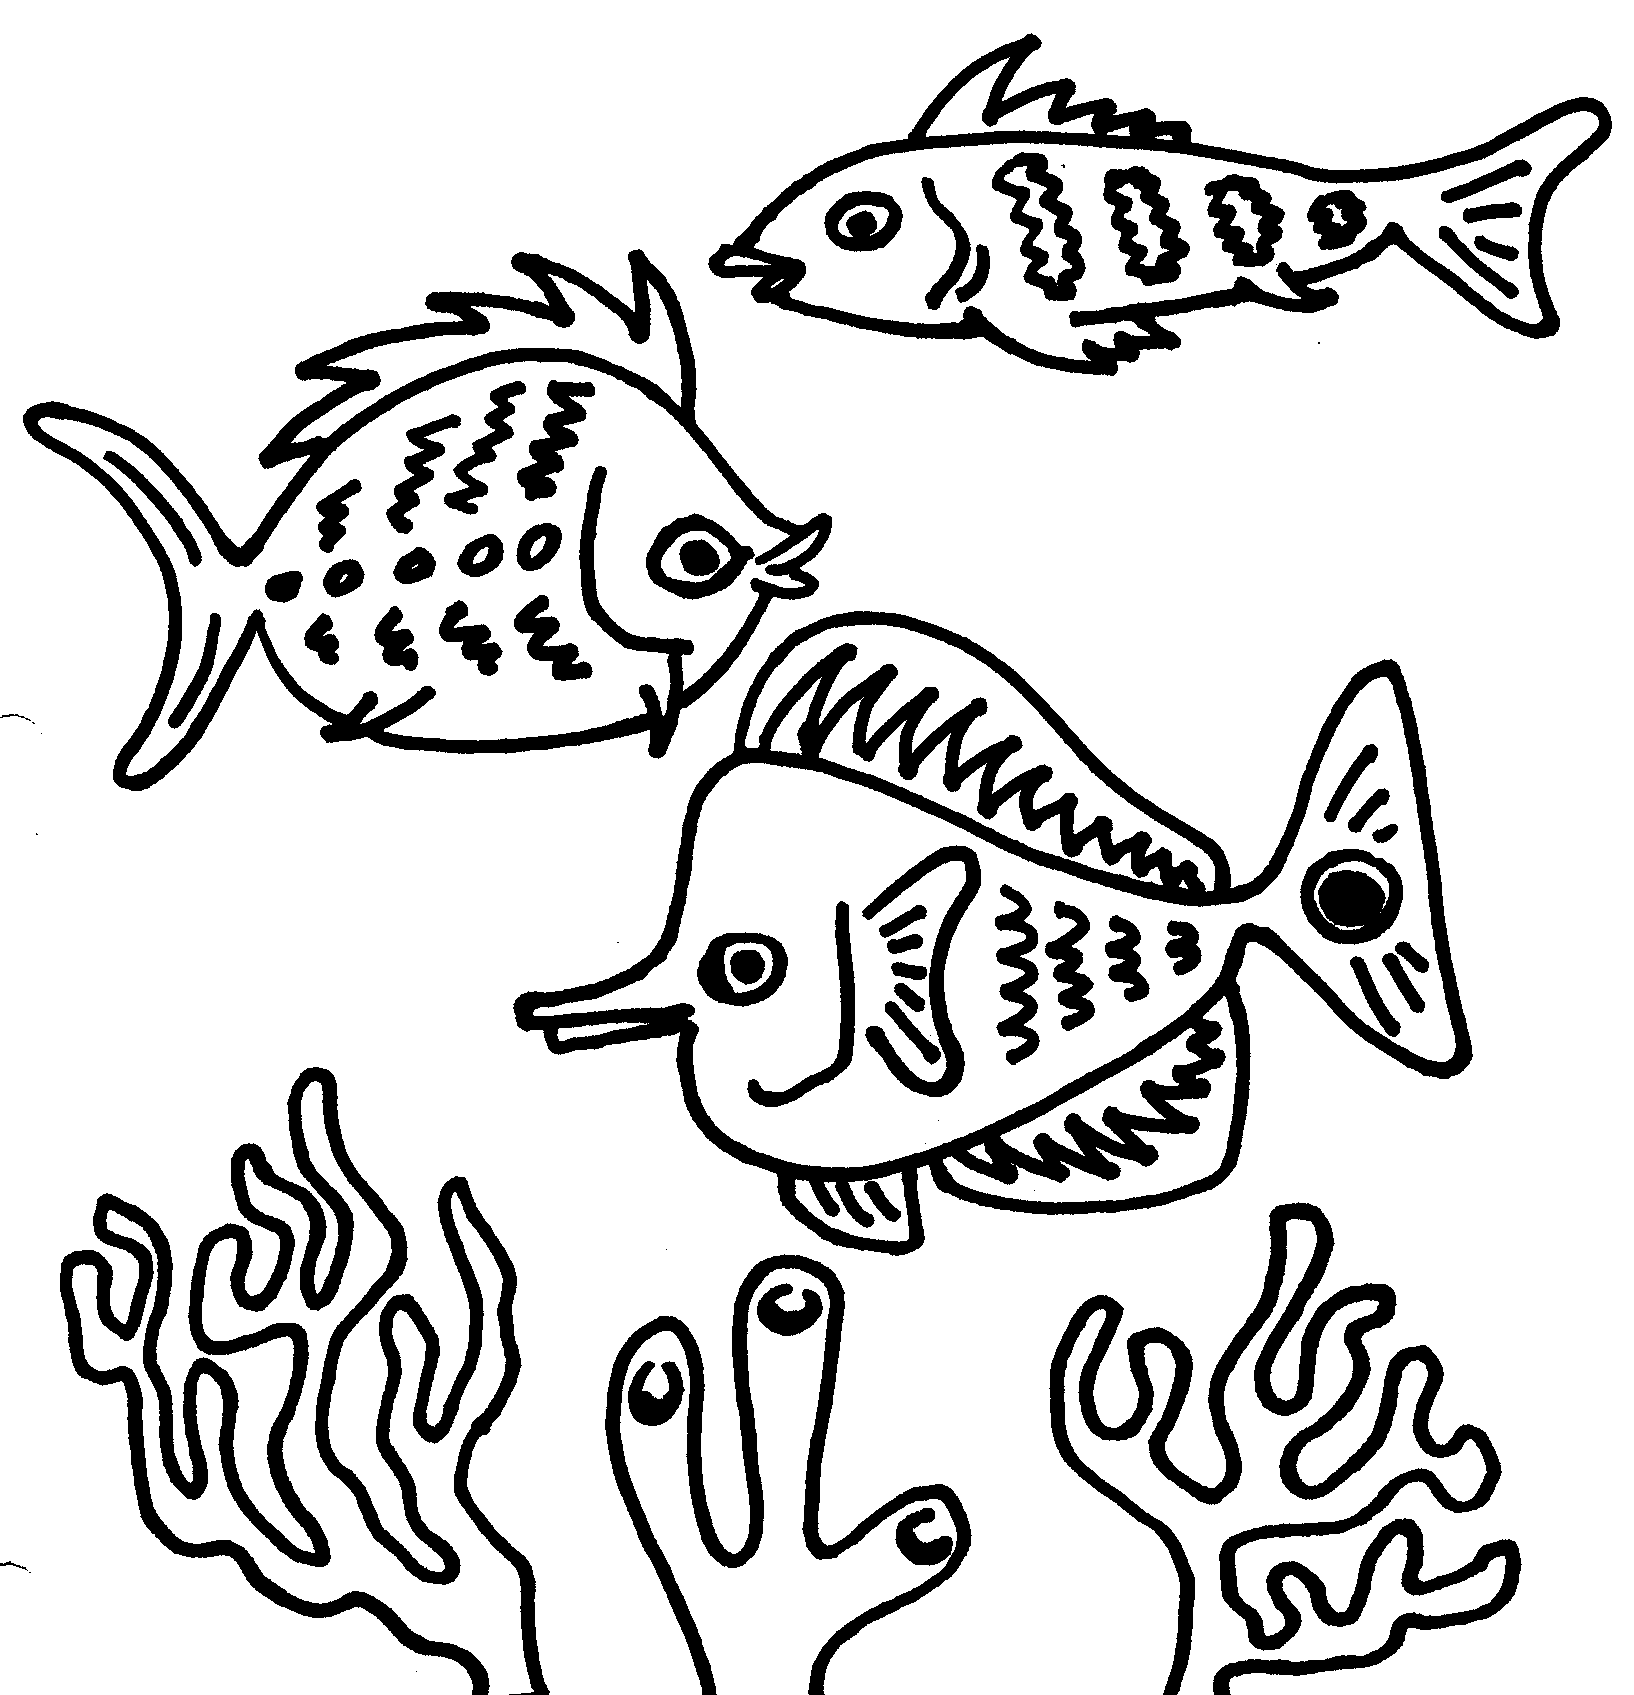 School of fish clipart black and white